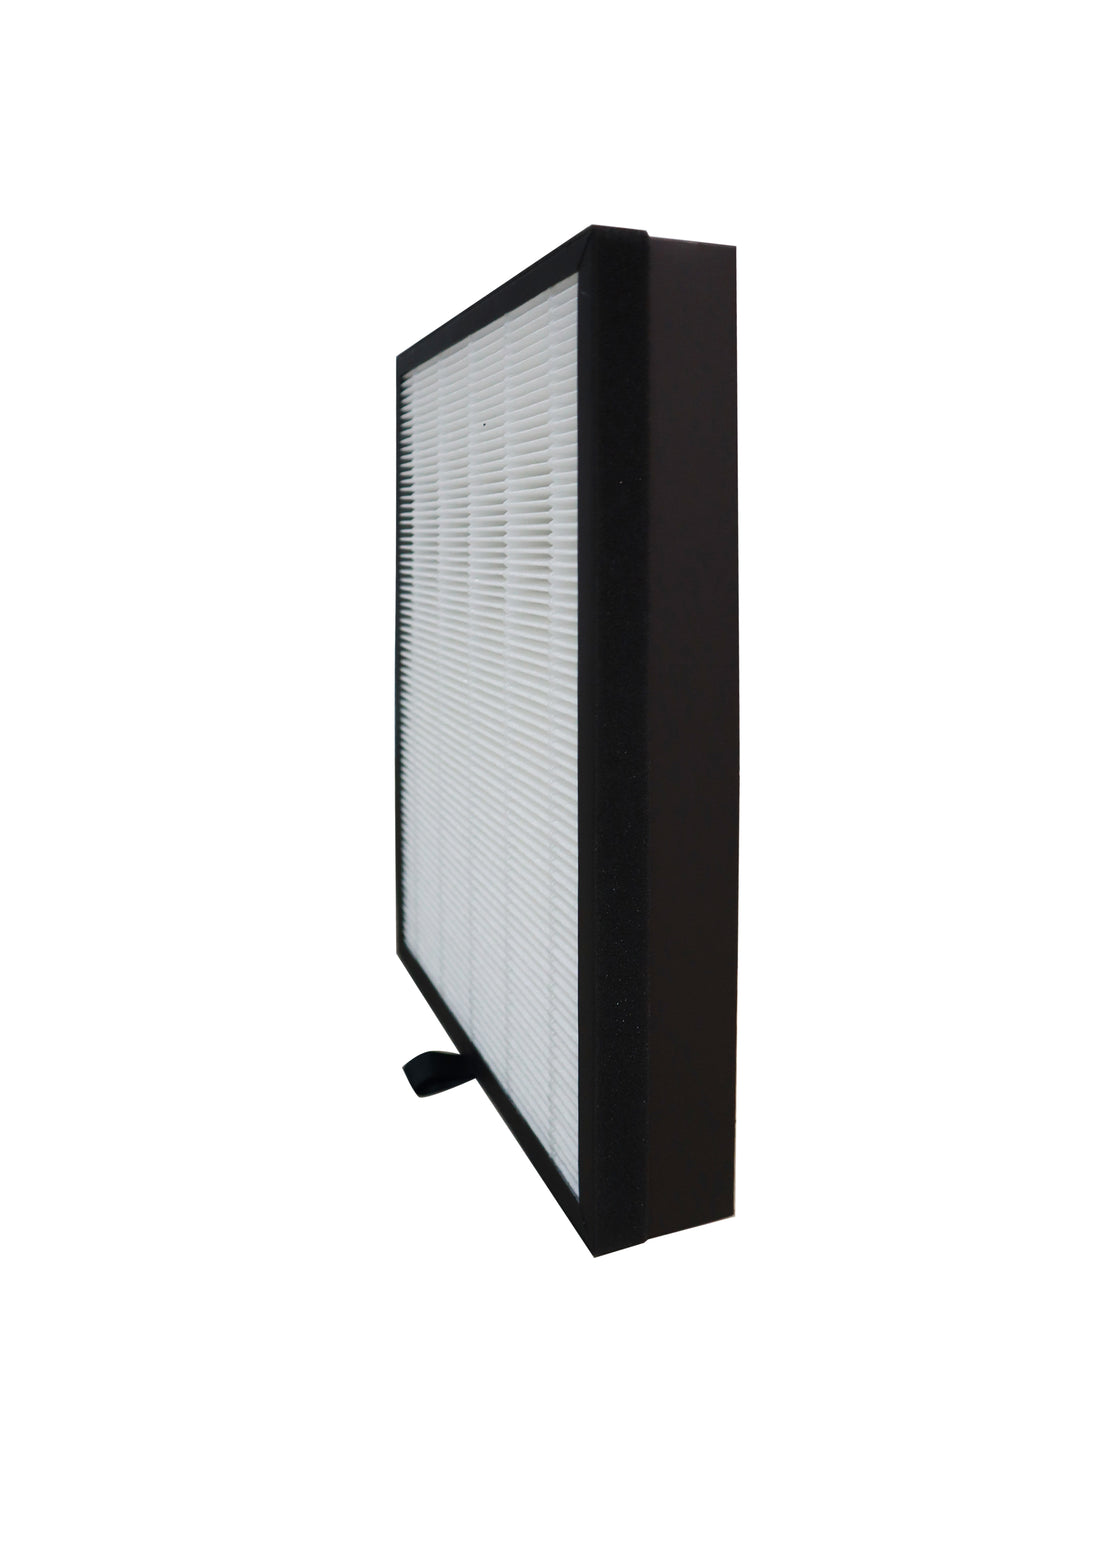 Shinco SAD-2401 Air Purifier with HEPA Filter-Air Purifiers-PEROZ Accessories